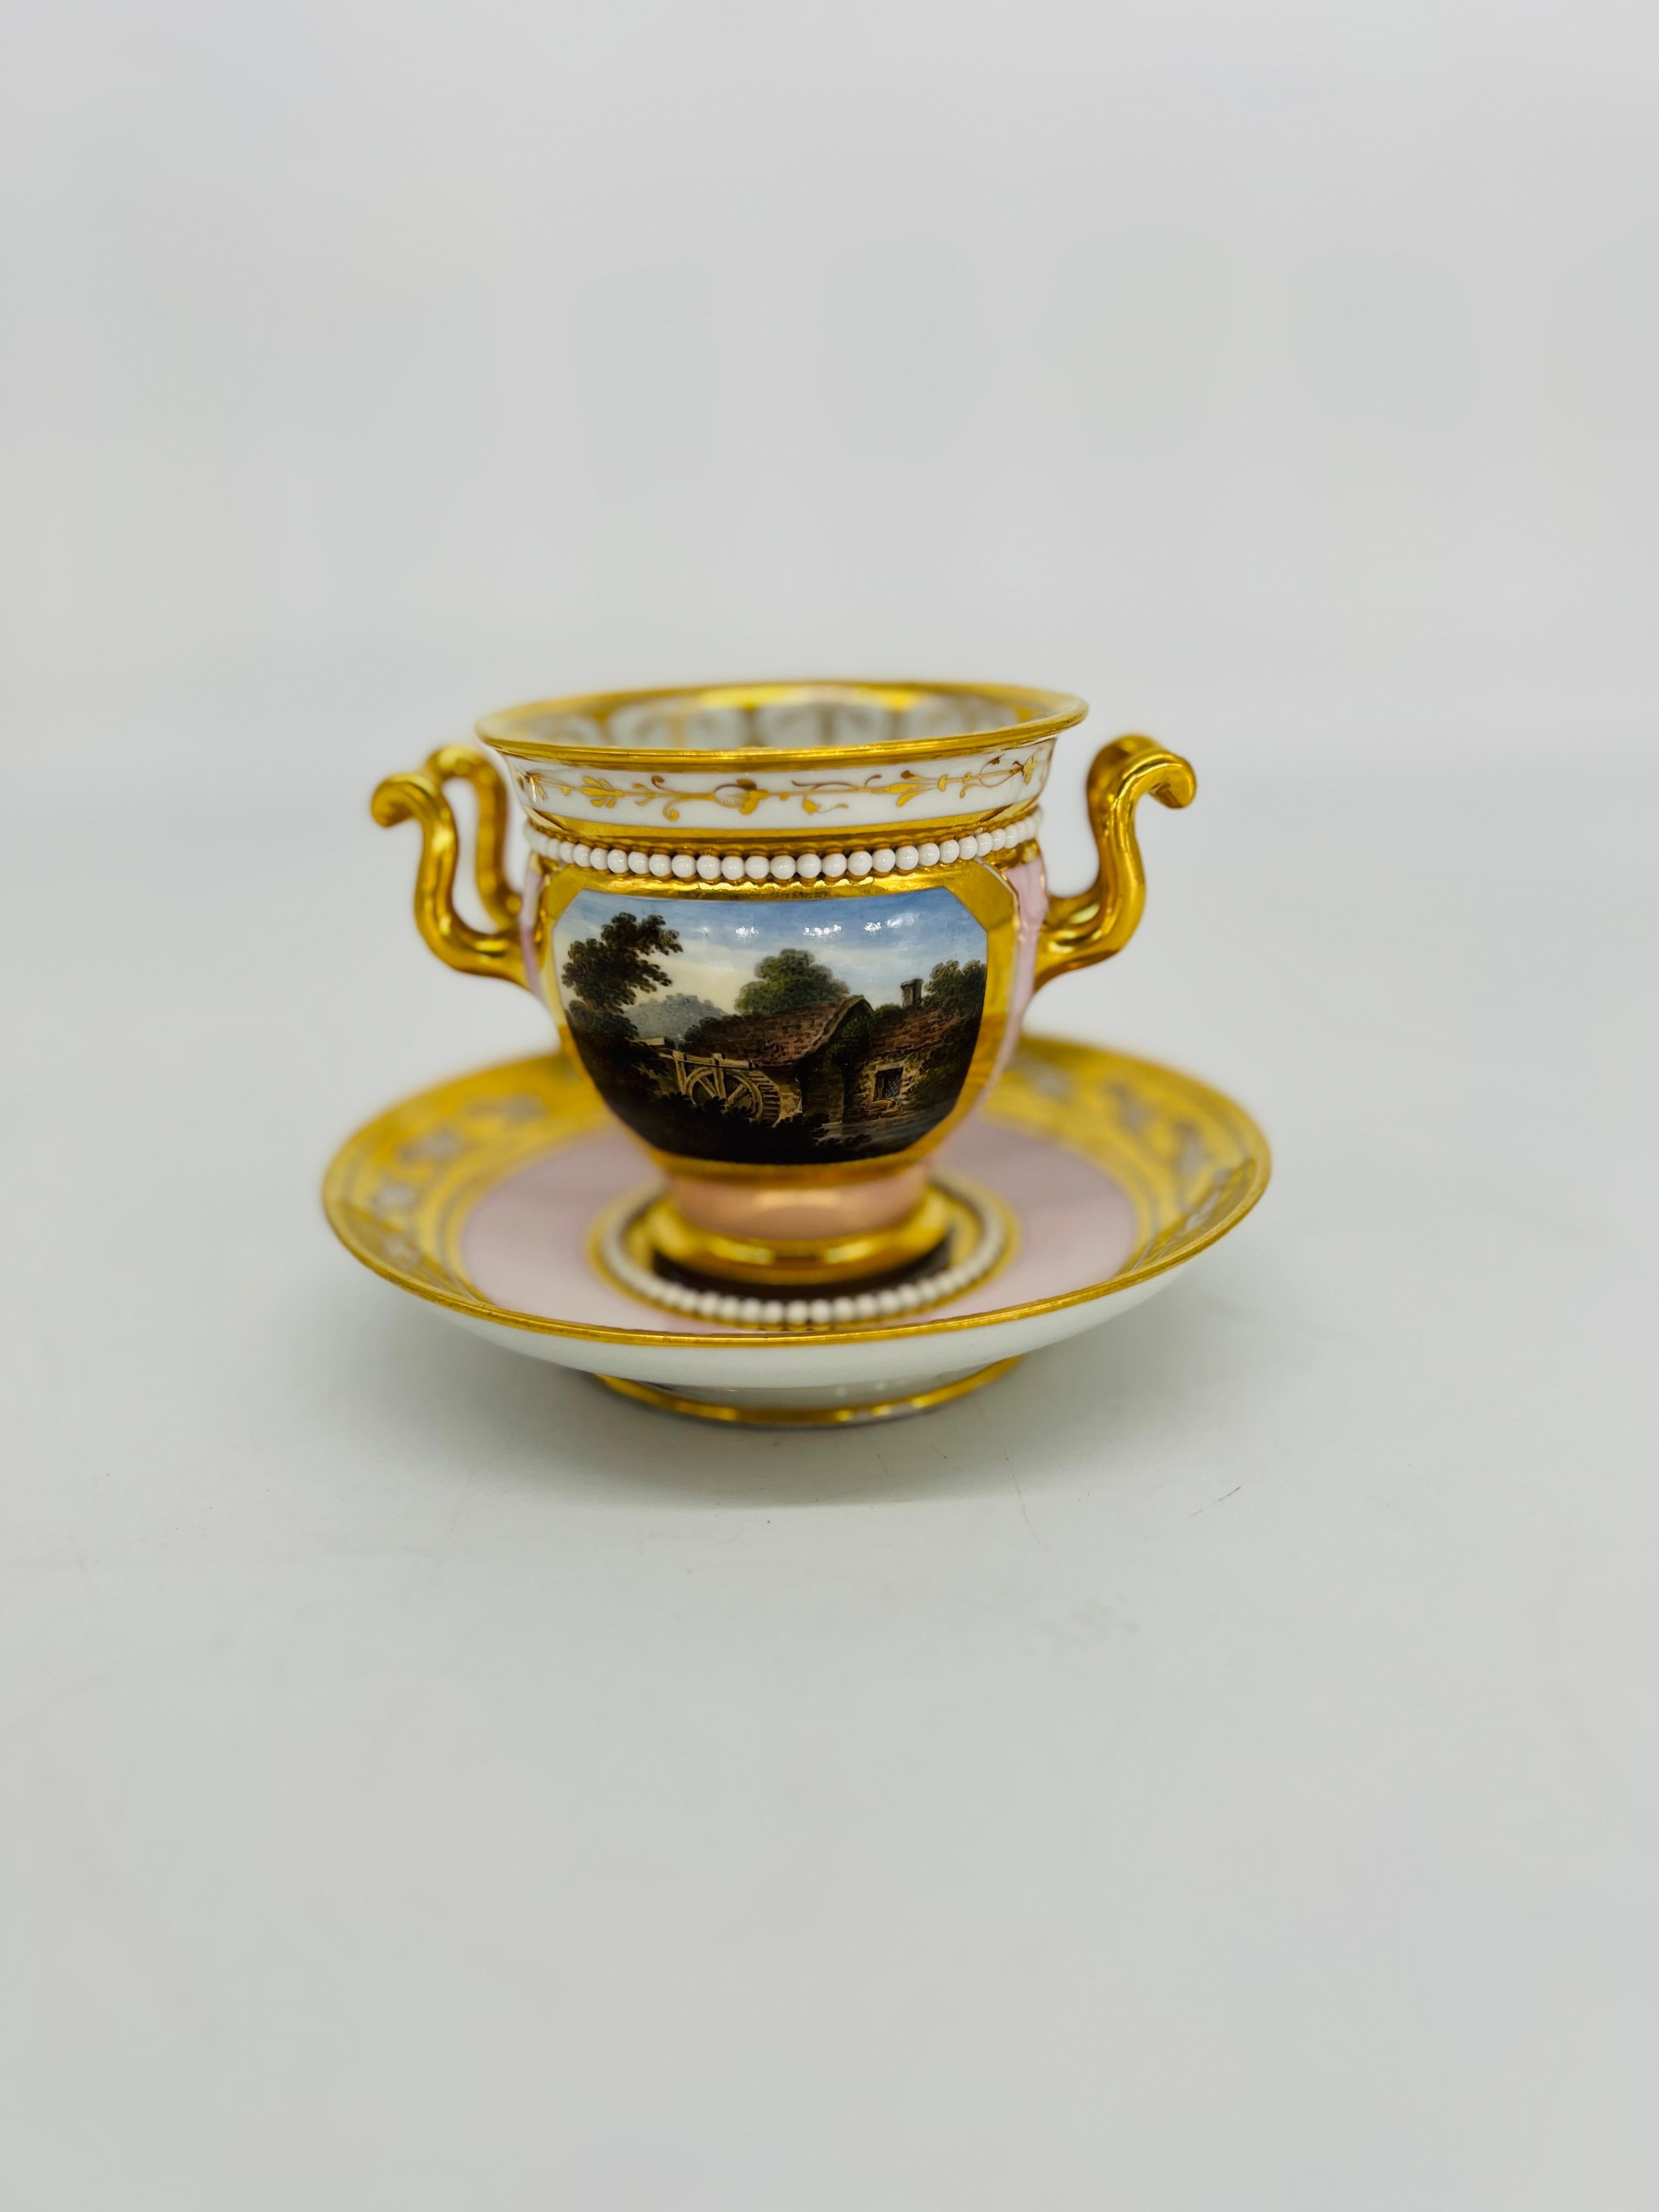 Flight Barr & Barr Porcelain Cabinet Cup & Saucer Attr: Thomas Baxter, circa 1815
One side decorated with a scene of Mettingham Castle - The home of the late Sir John de Norwich in 1342.
Verso features The Mill Near Llangollen which likely refers